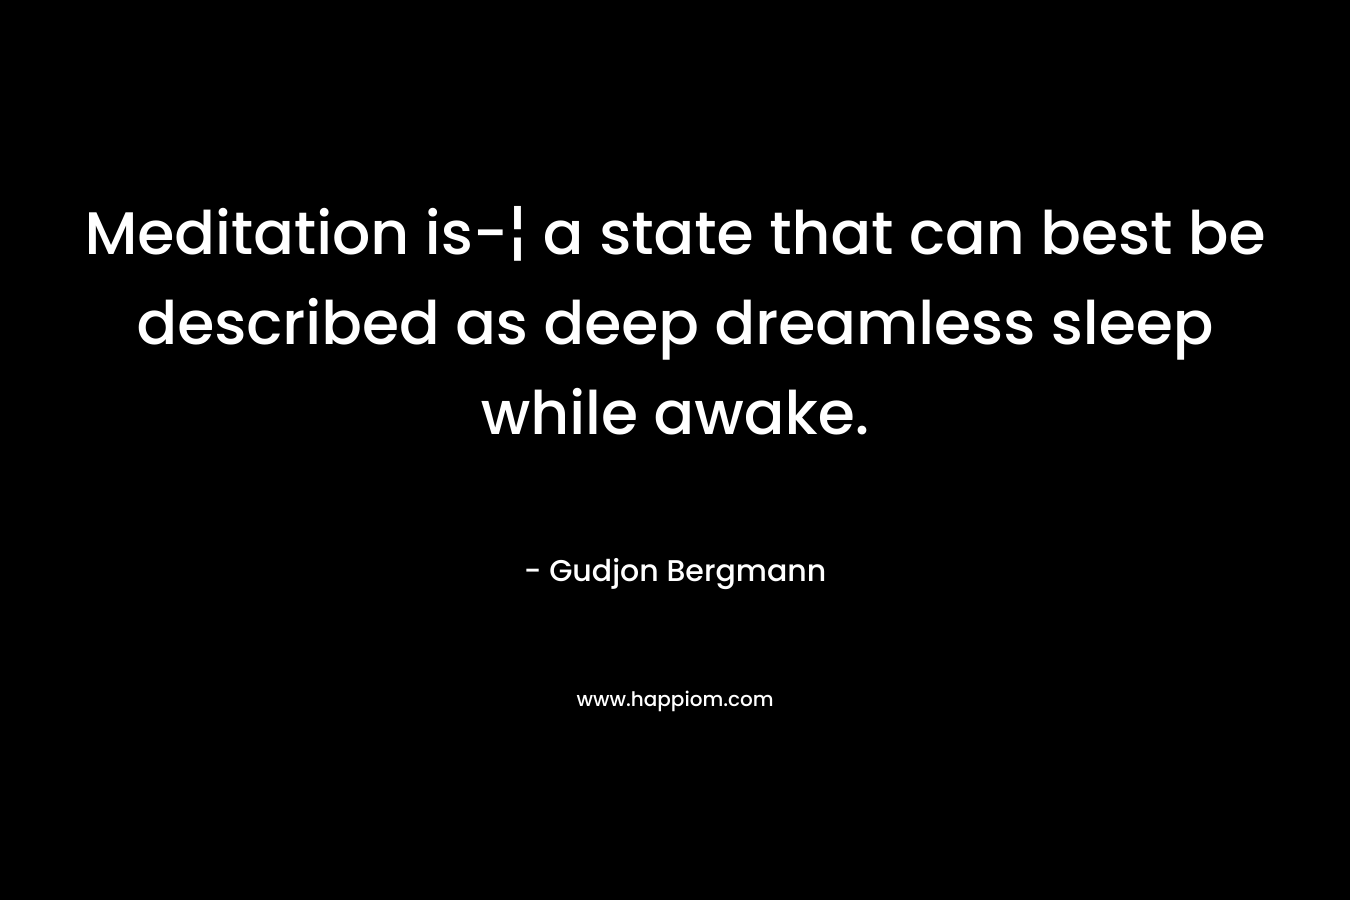 Meditation is-¦ a state that can best be described as deep dreamless sleep while awake.